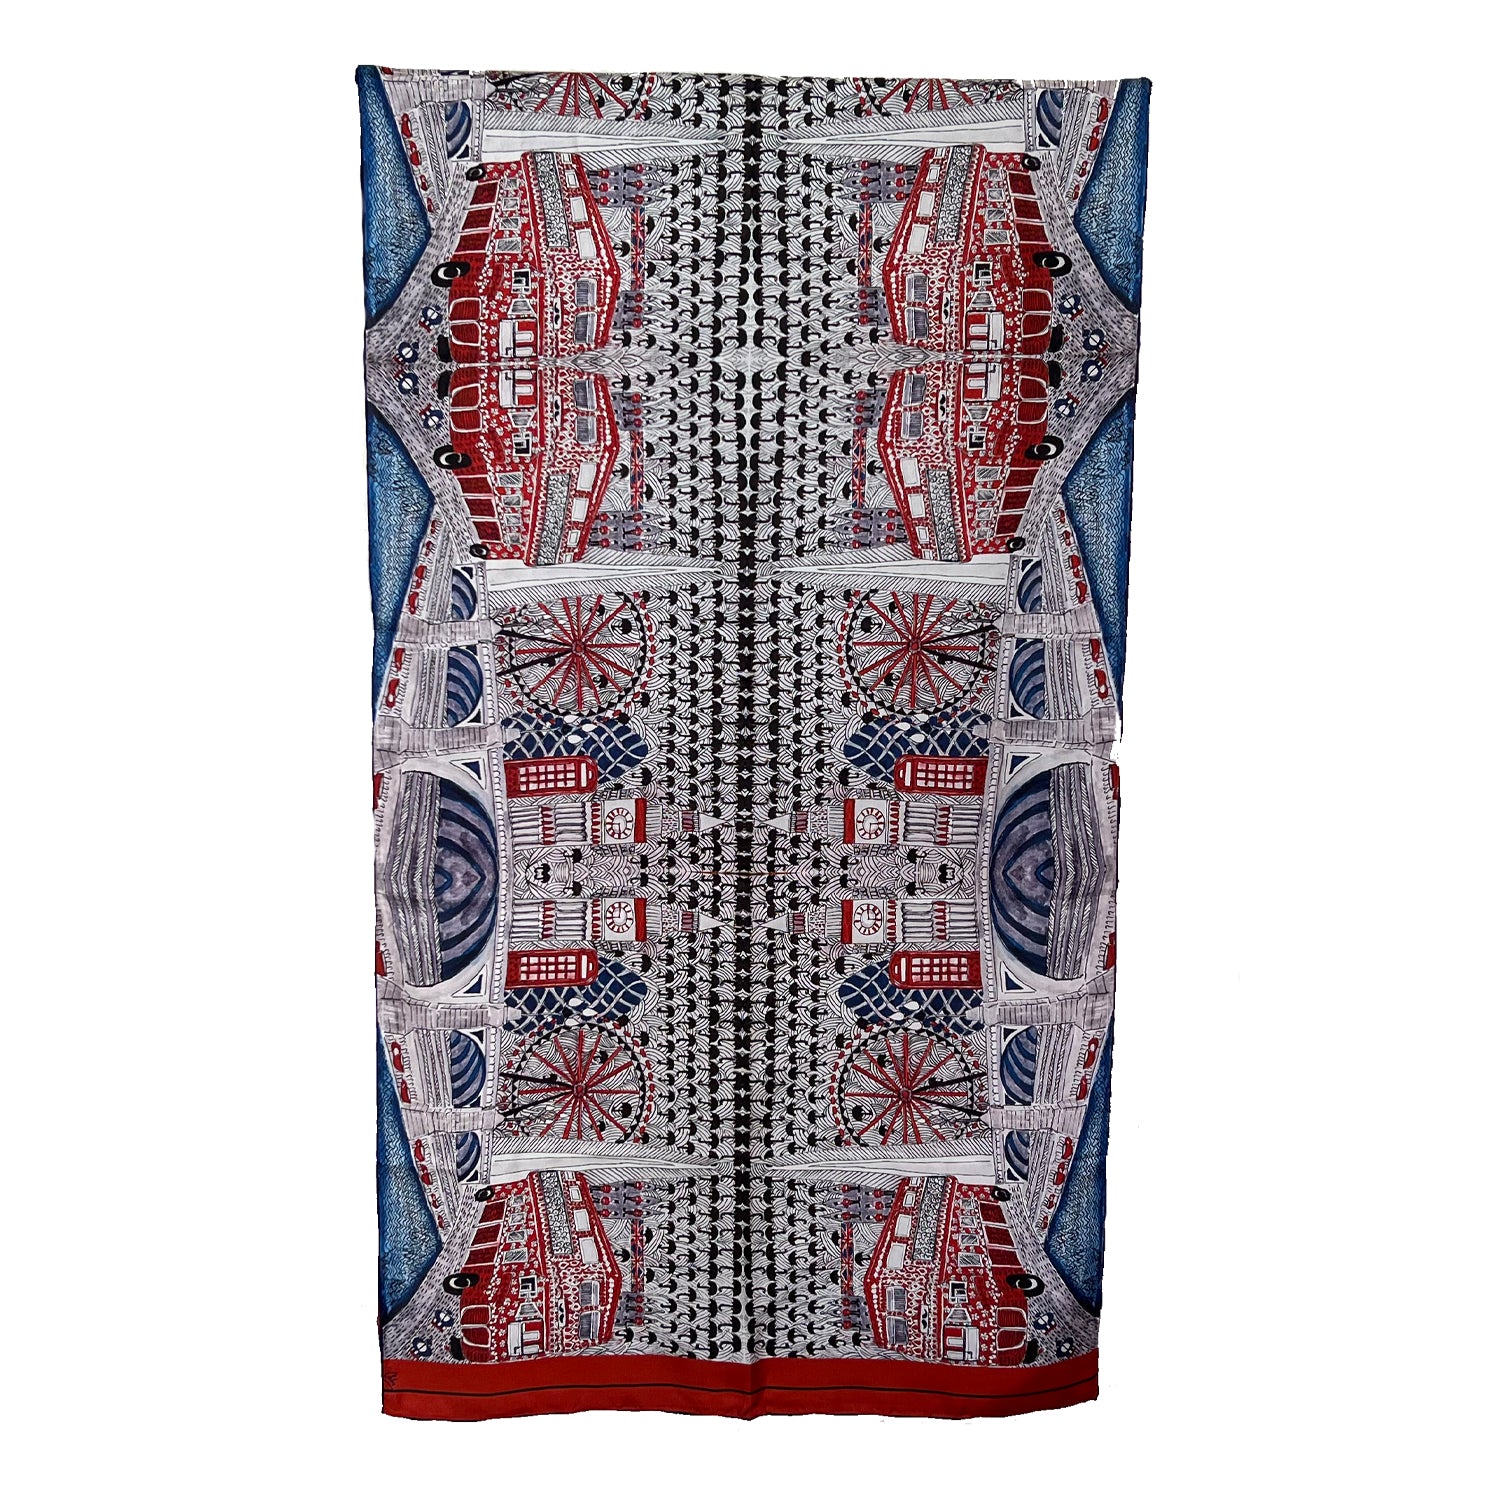 London long silk scarf, red white blue scarf with  cityscape, hand painted and printed on silk, folklore collection, chetnasingh scarves